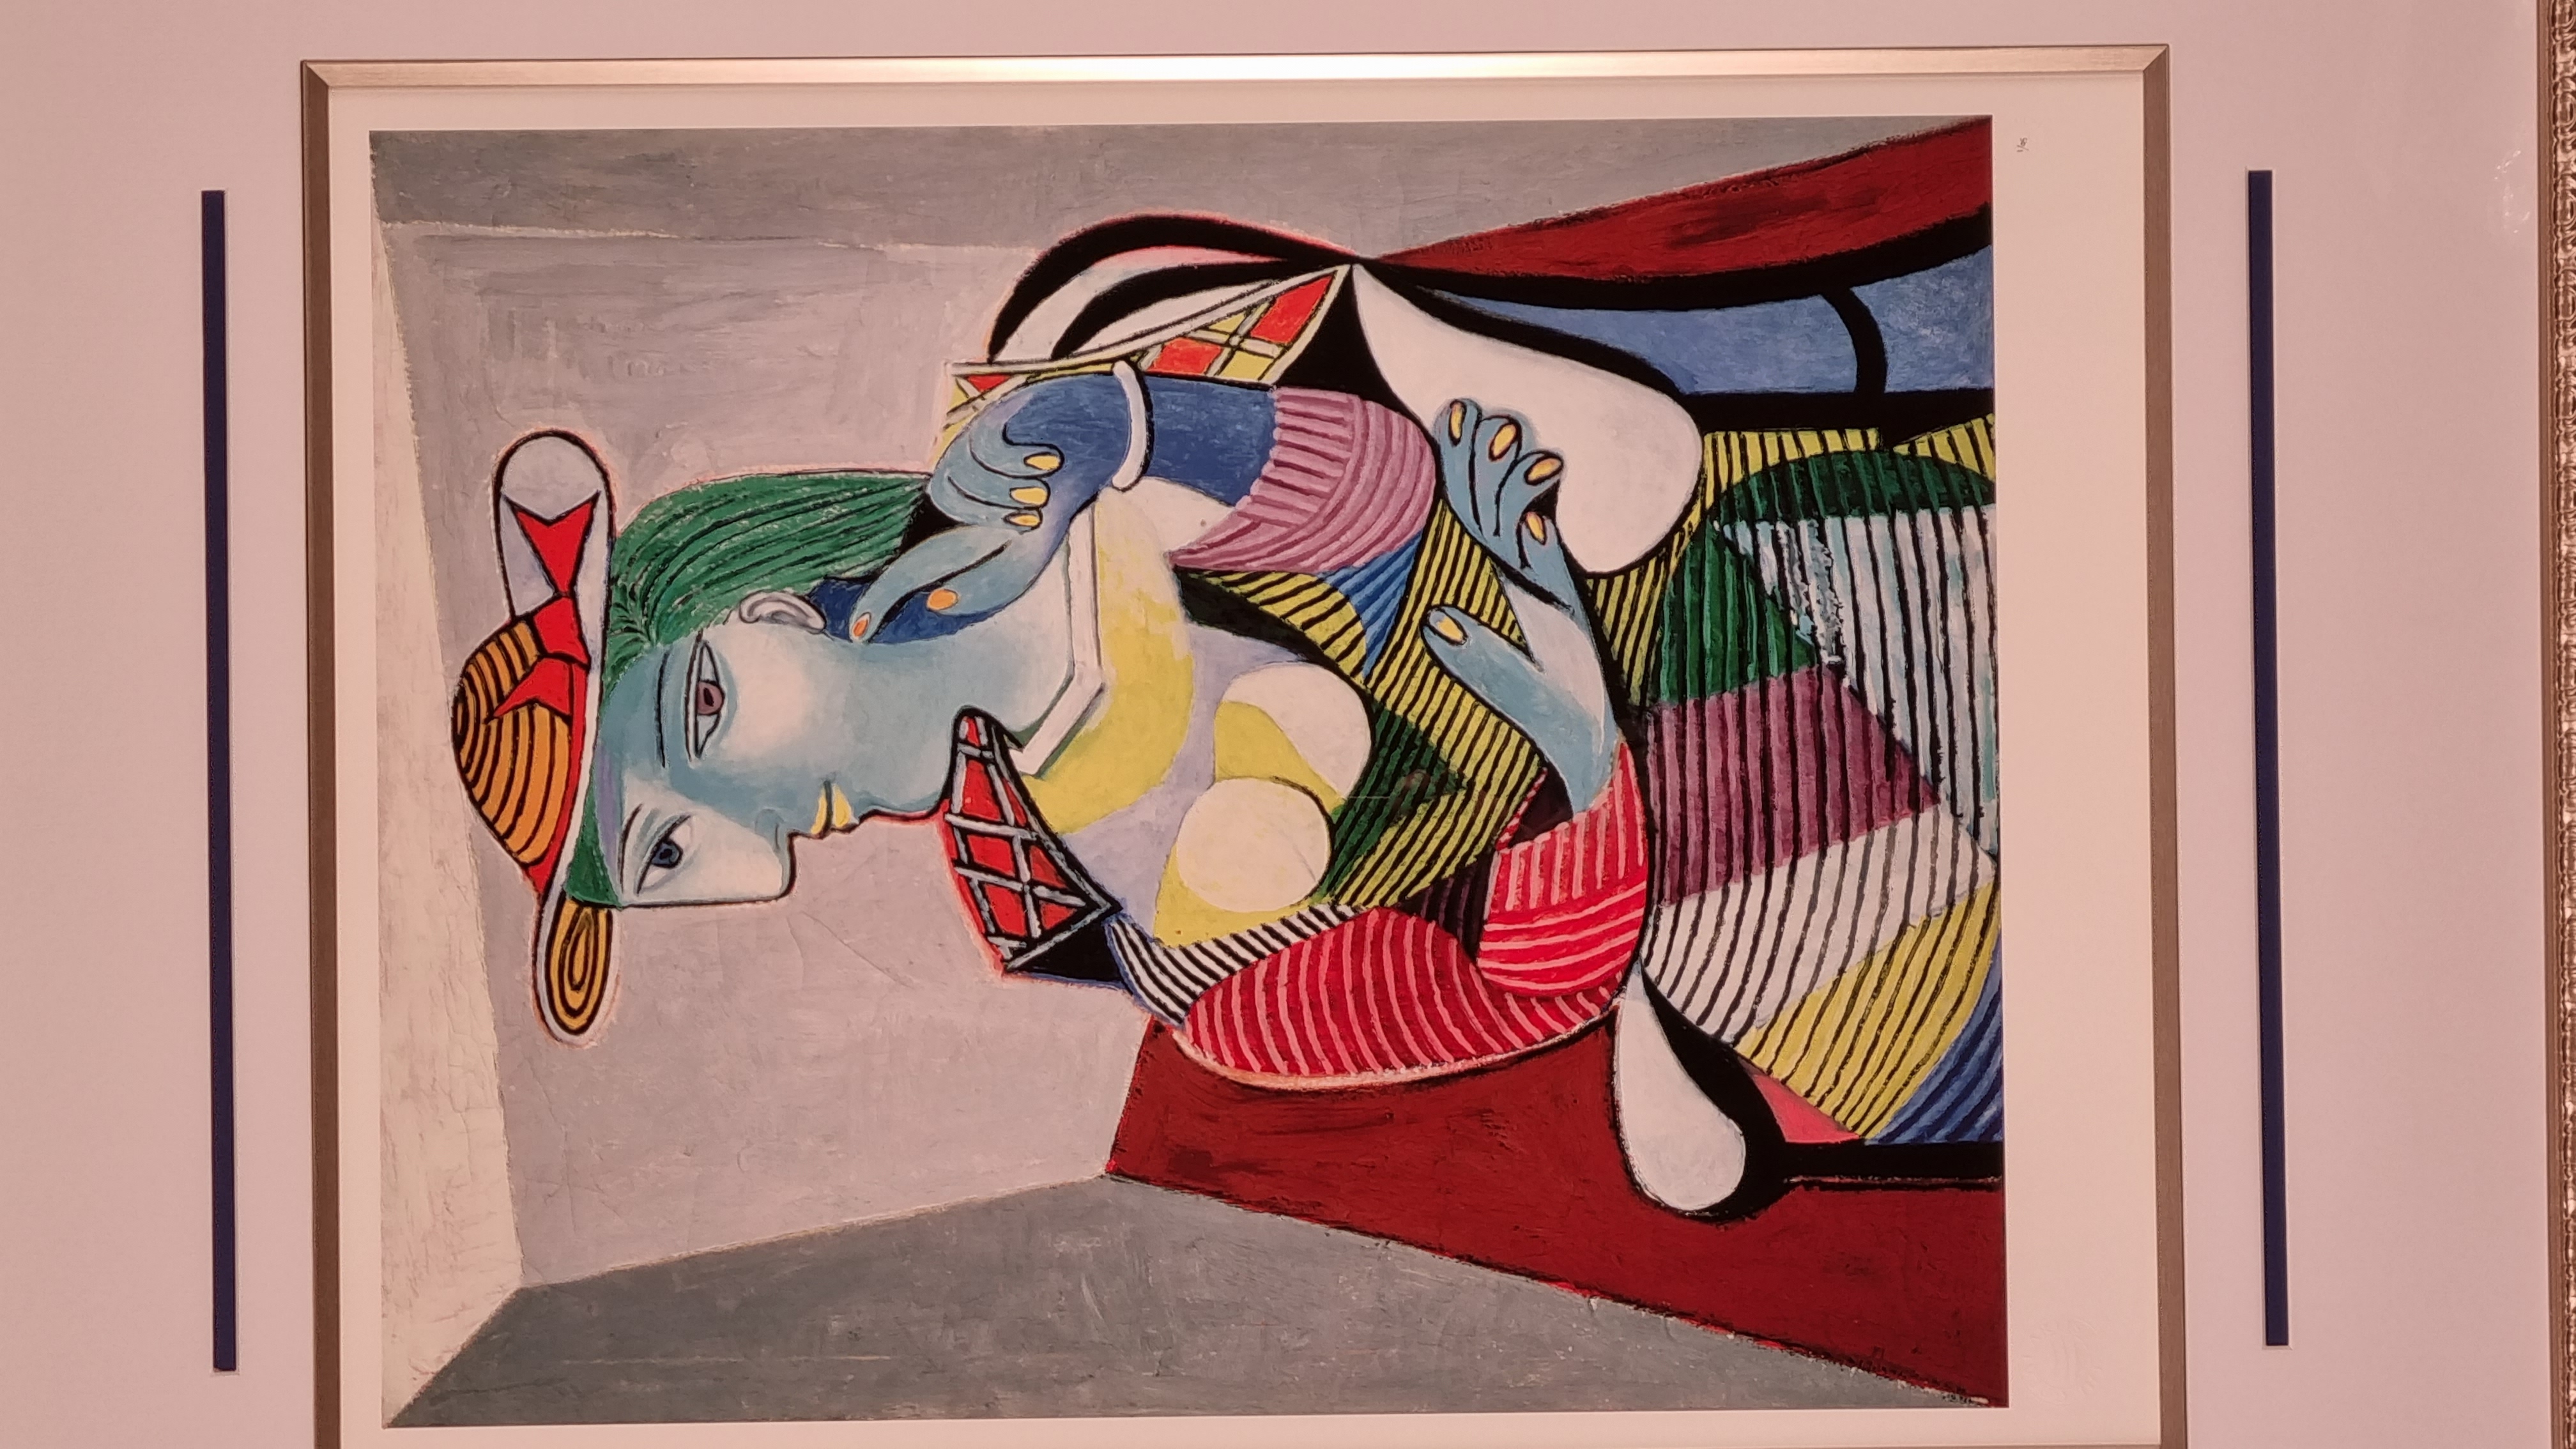 Pablo Picasso Limited Edition "Portrait of Marie-Therese, 1937" - Image 2 of 9